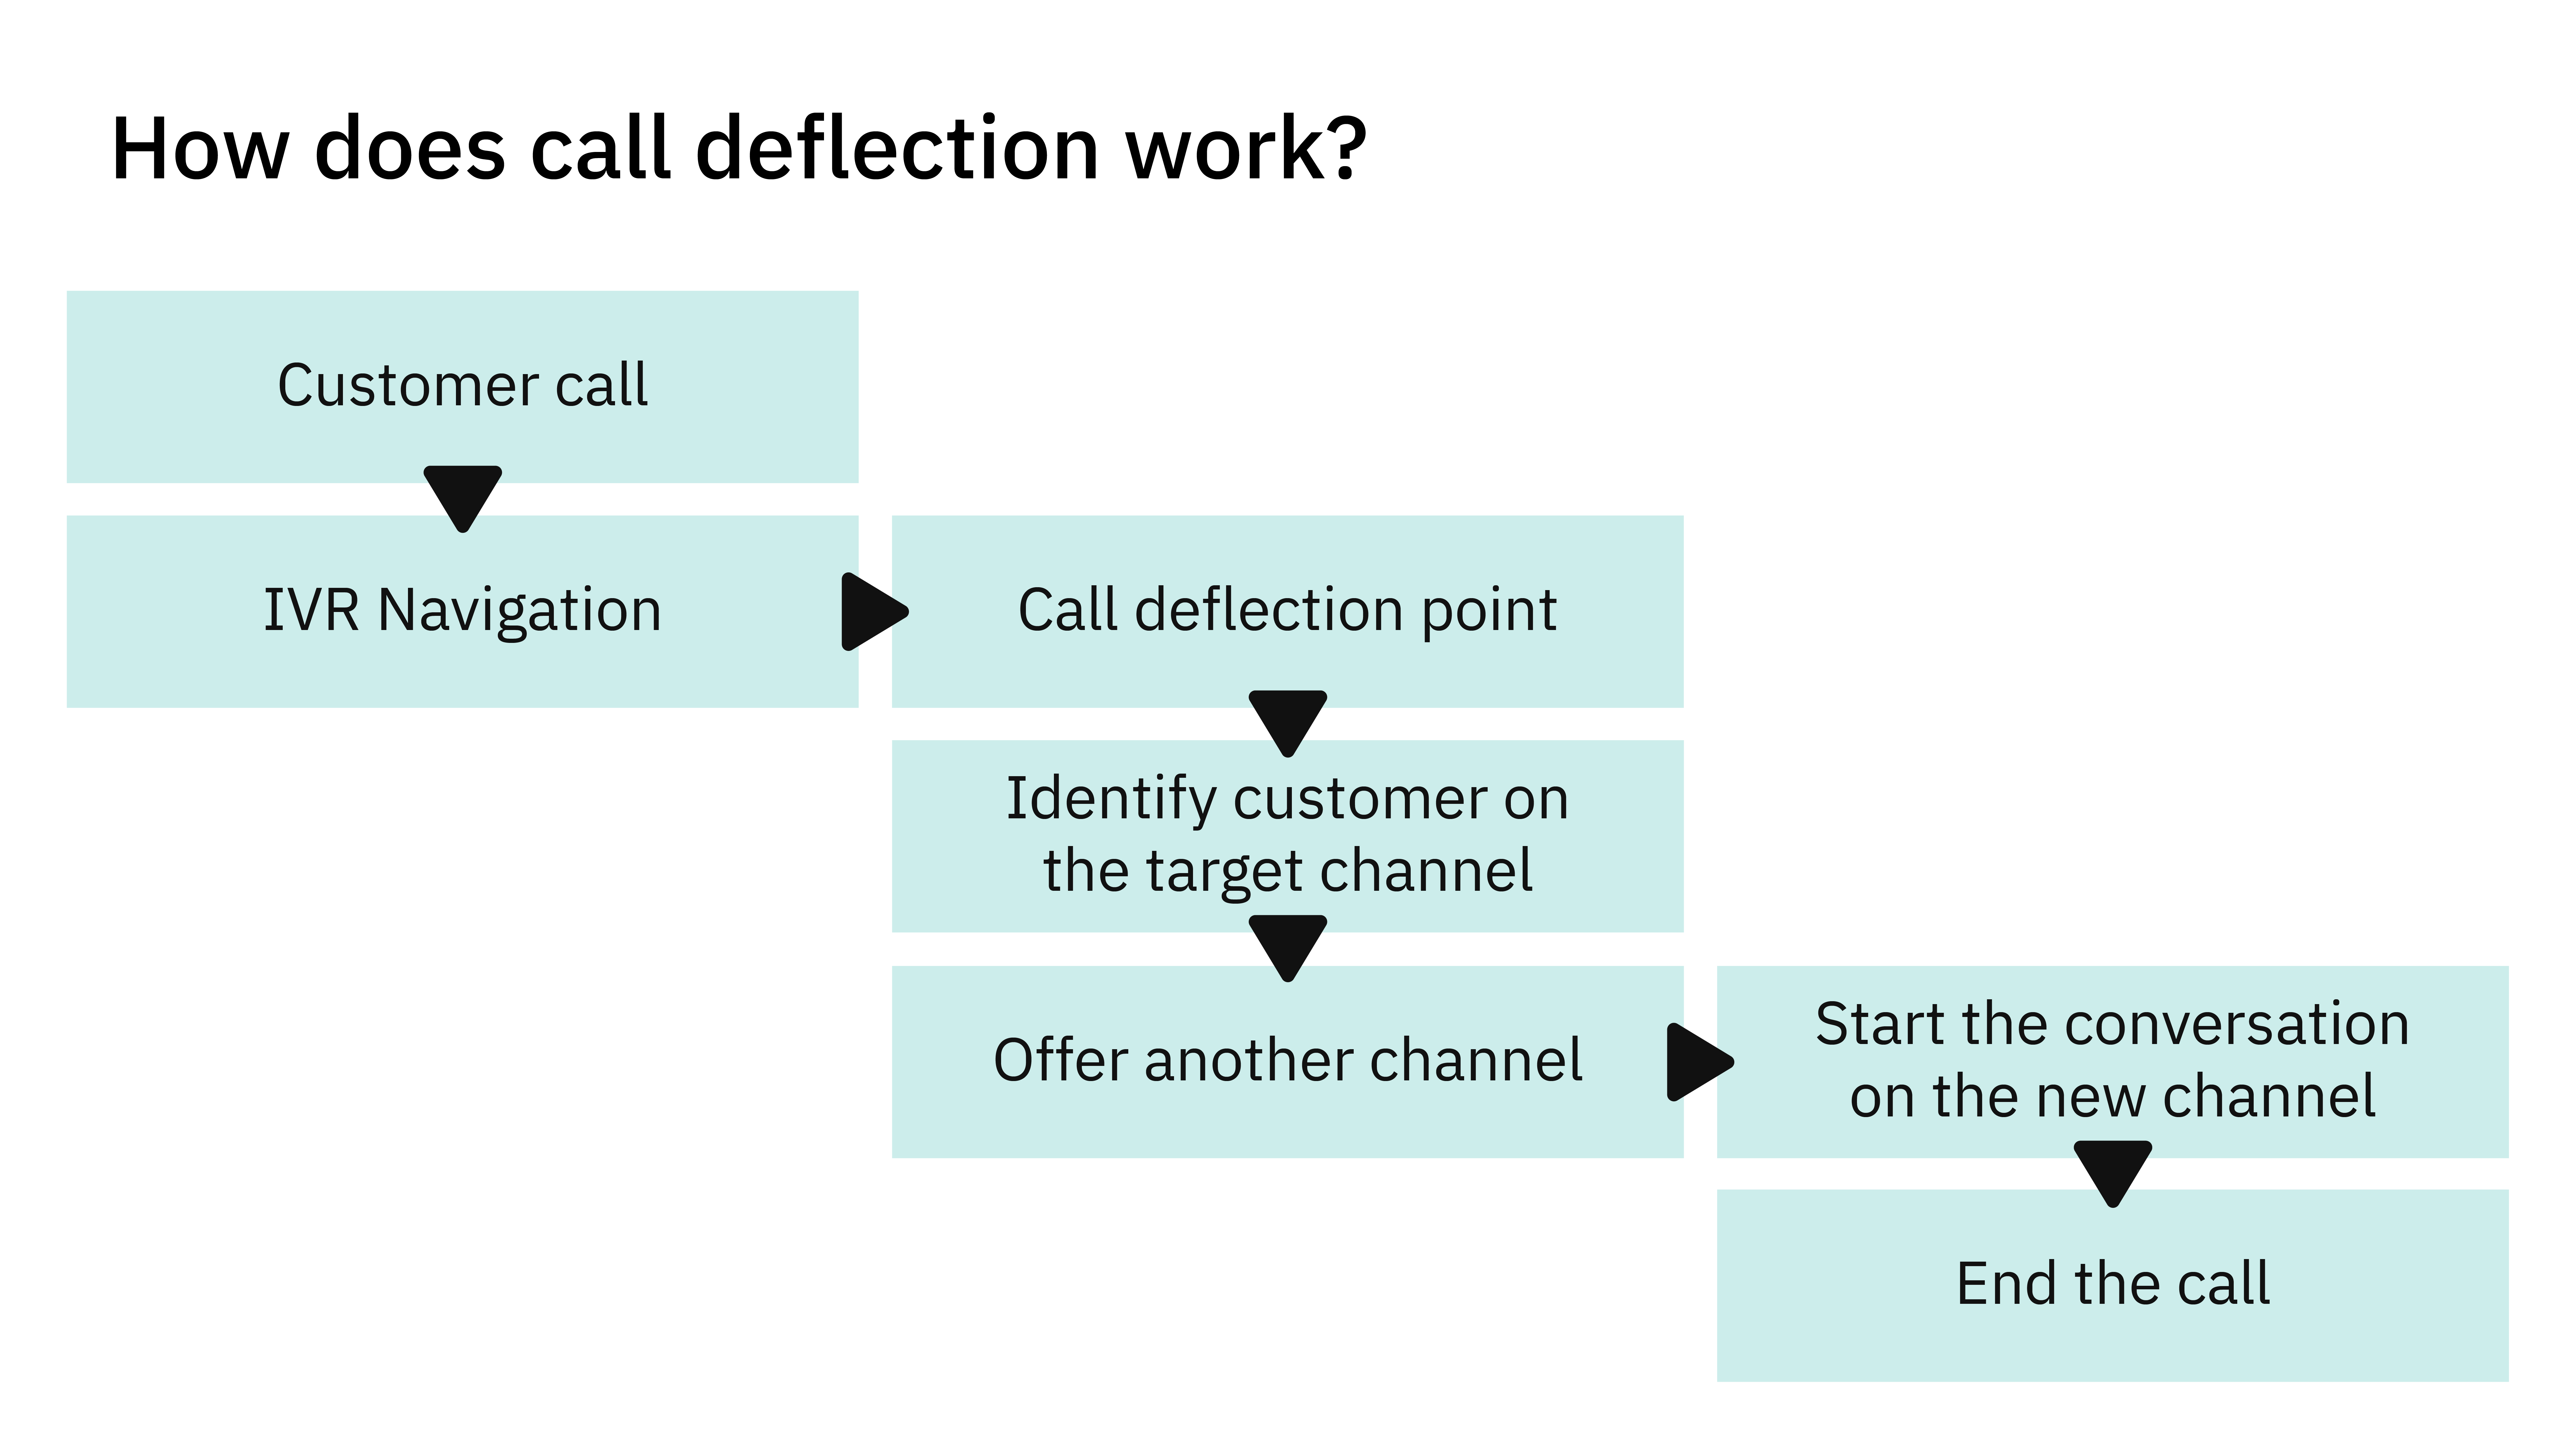 How does call deflection work?